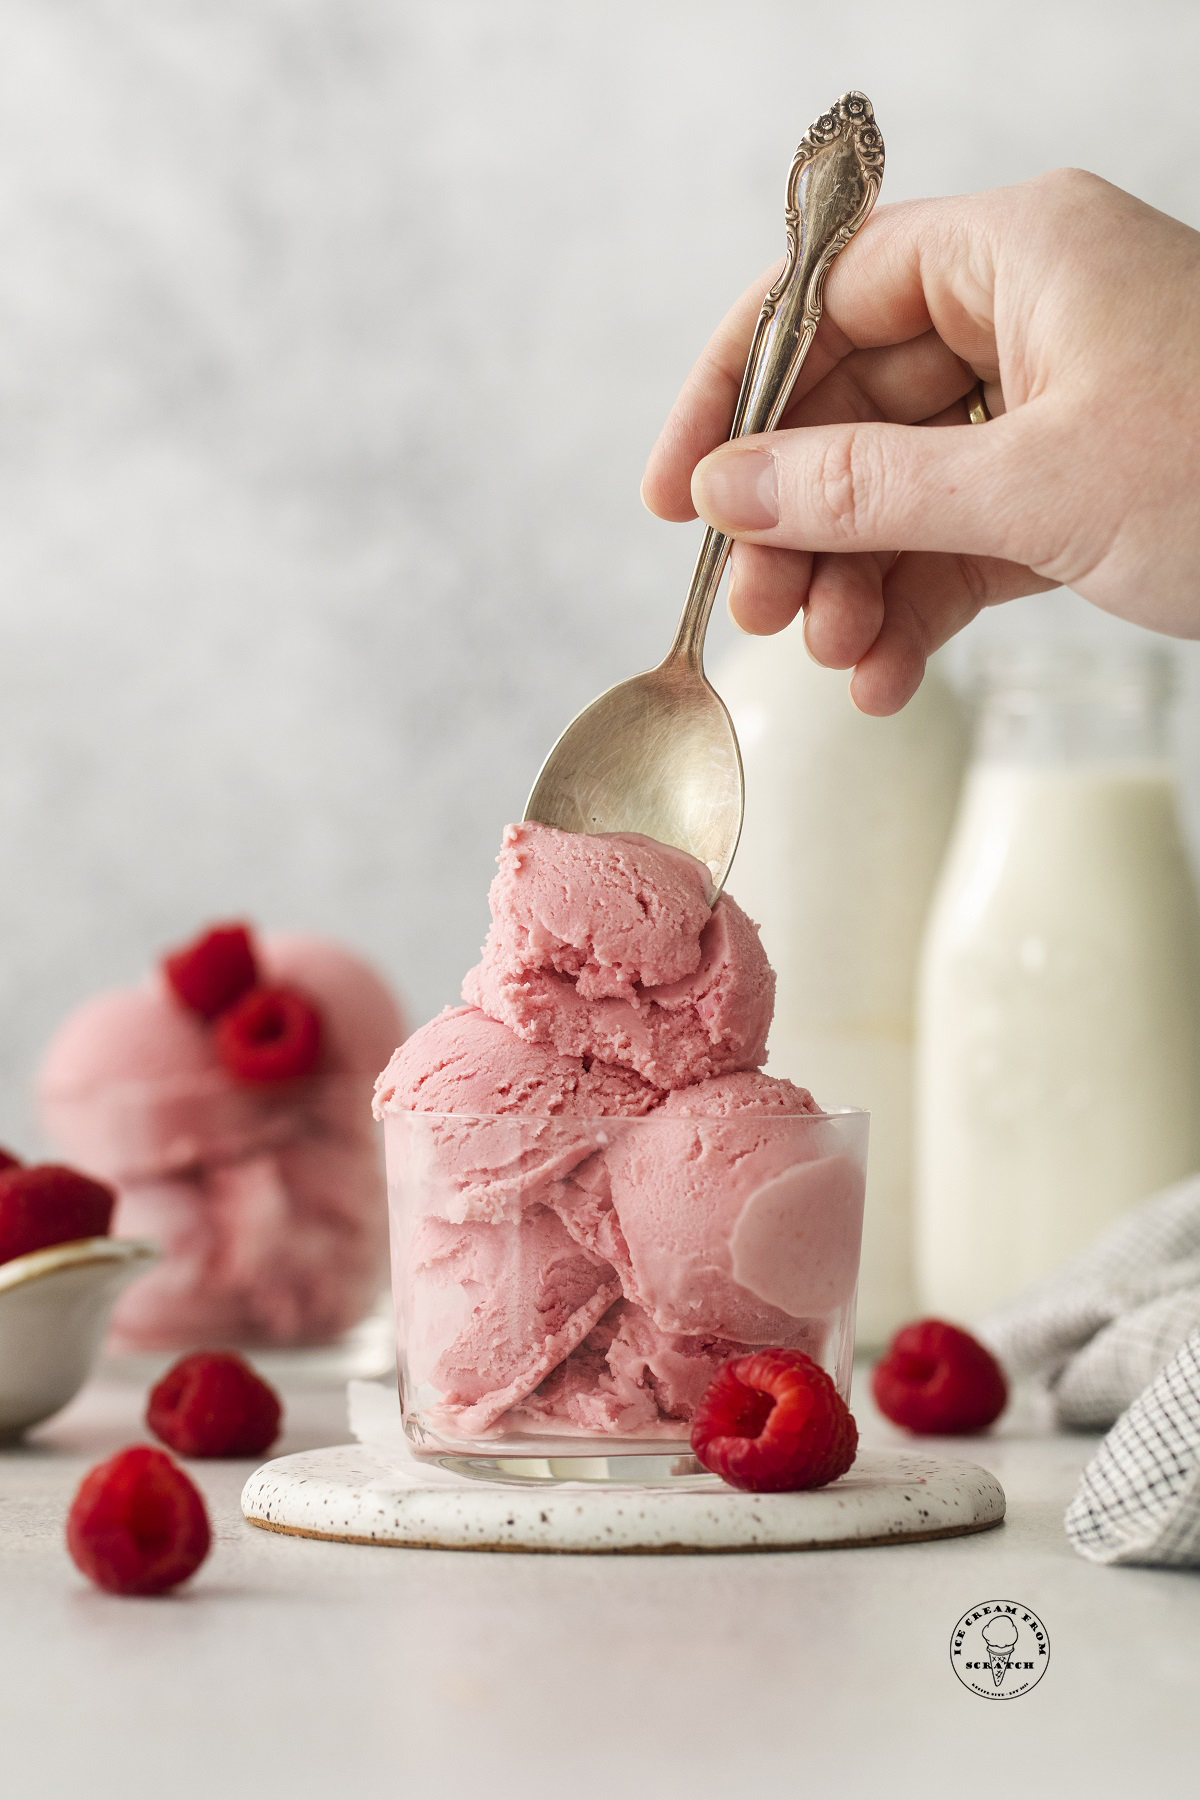 a hand holding a silver spoon that is scooping into a glass bowl filled with scoops of pink sherbet. Raspberries are next to the bowl, and bottles of cream are in the background.